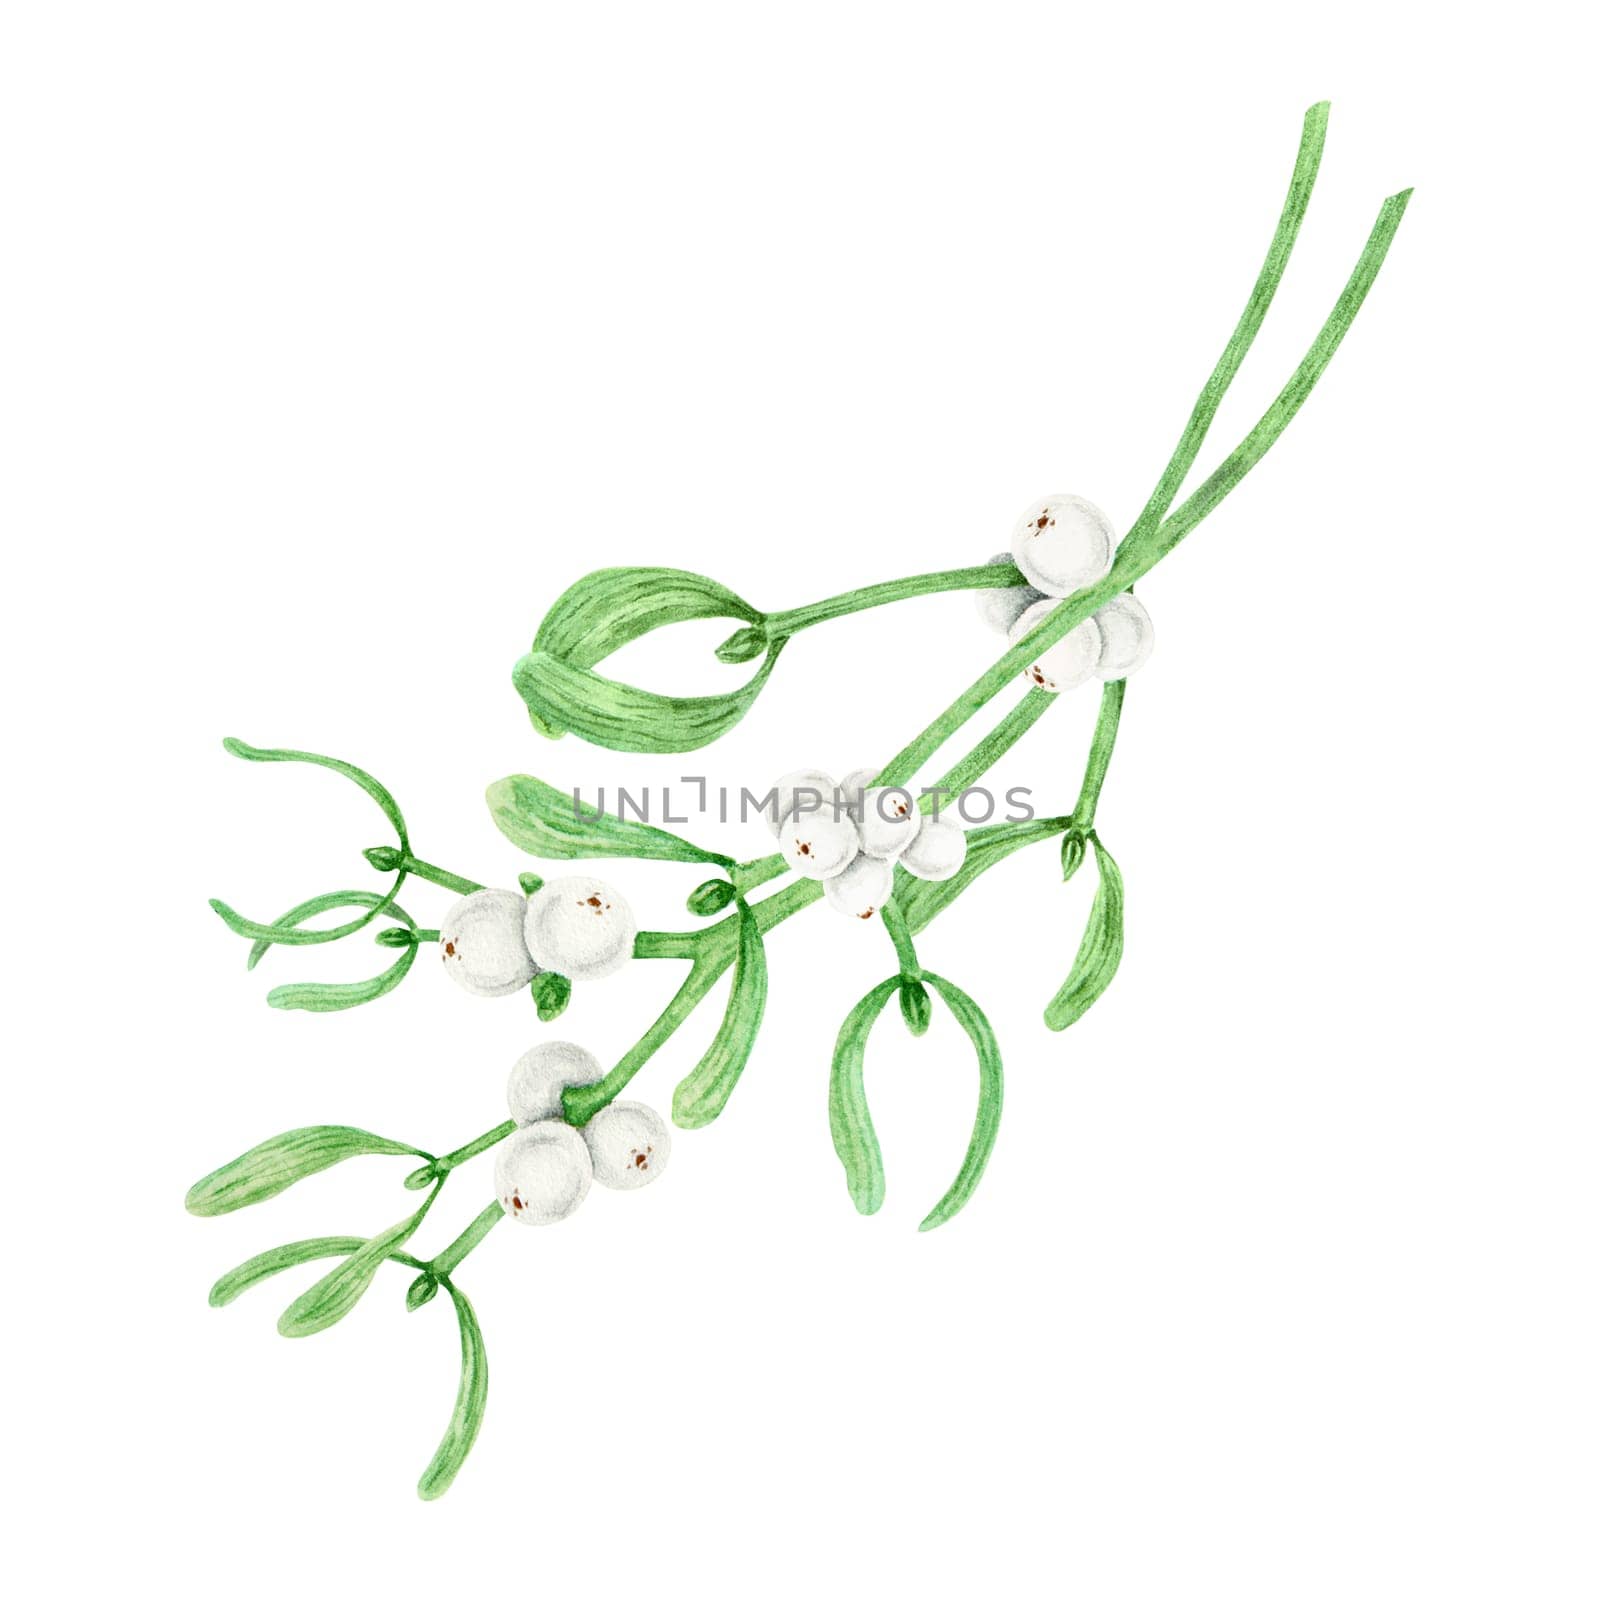 Bouquet of Mistletoe evergreen branches with leaves and white berries. Watercolor hand drawn botanical illustration of Christmas symbol. Plant for homeopathy, medicine. Elements for winter prints, cards